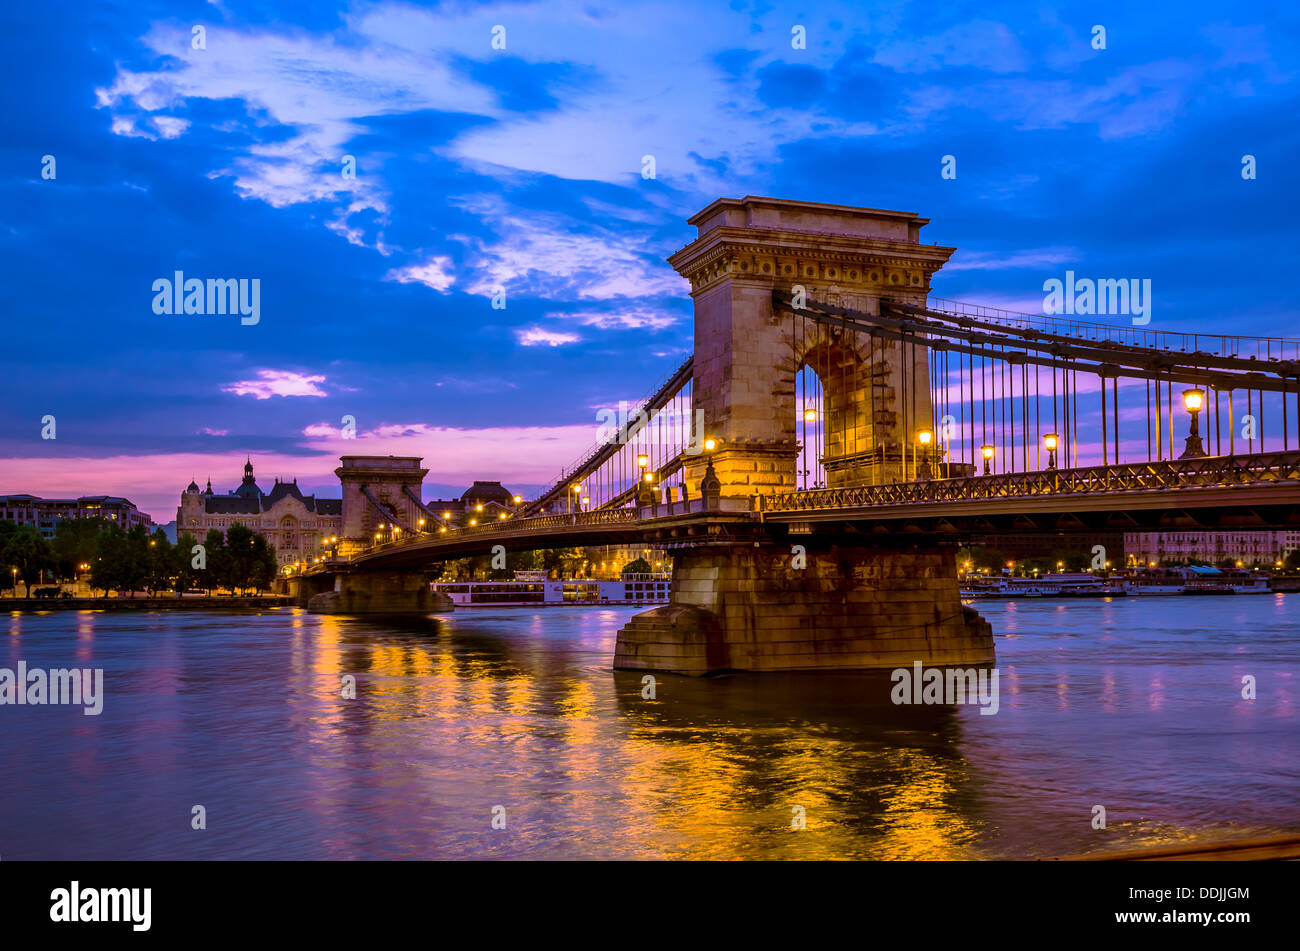 Szechenyi Chain Bridge is a suspension that spans the River Danube between Buda and Pest, in Budapest, the capital of Hungary Stock Photo